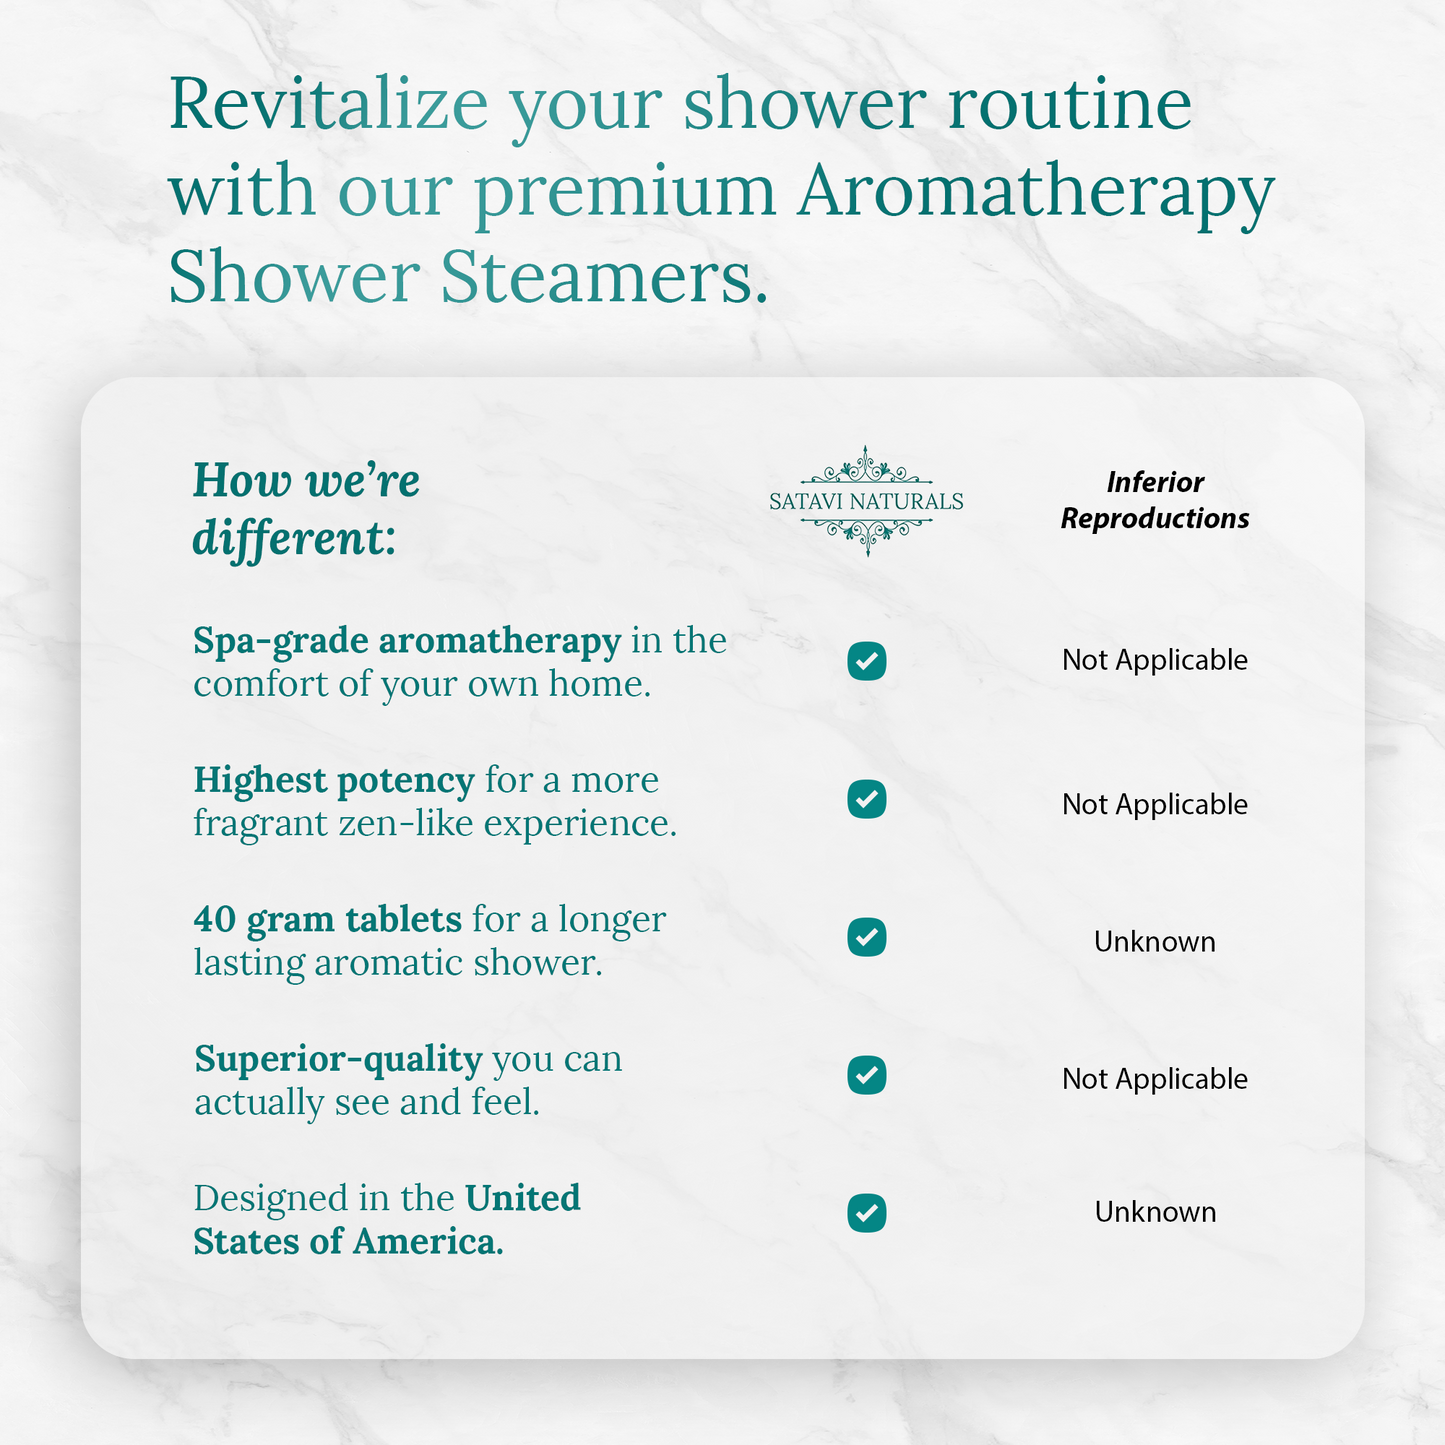 Aromatherapy Shower Steamers Standard Pack